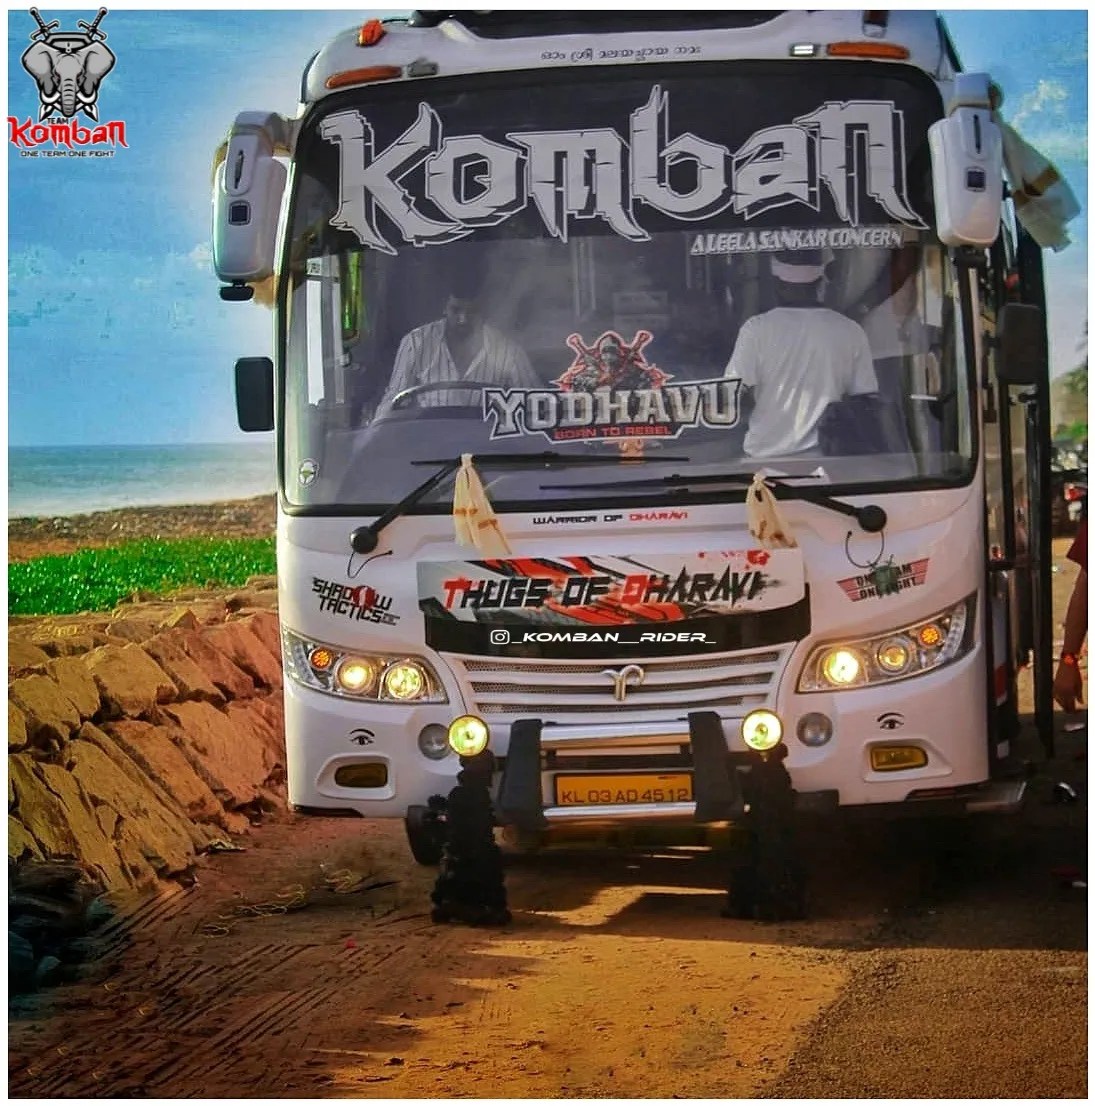 Komban Bus Skin Download Kaliyan / Komban Bus Wallpaper, Here you can download any video even komban bus drawing from youtube, vk.com, facebook, instagram, and many other sites for